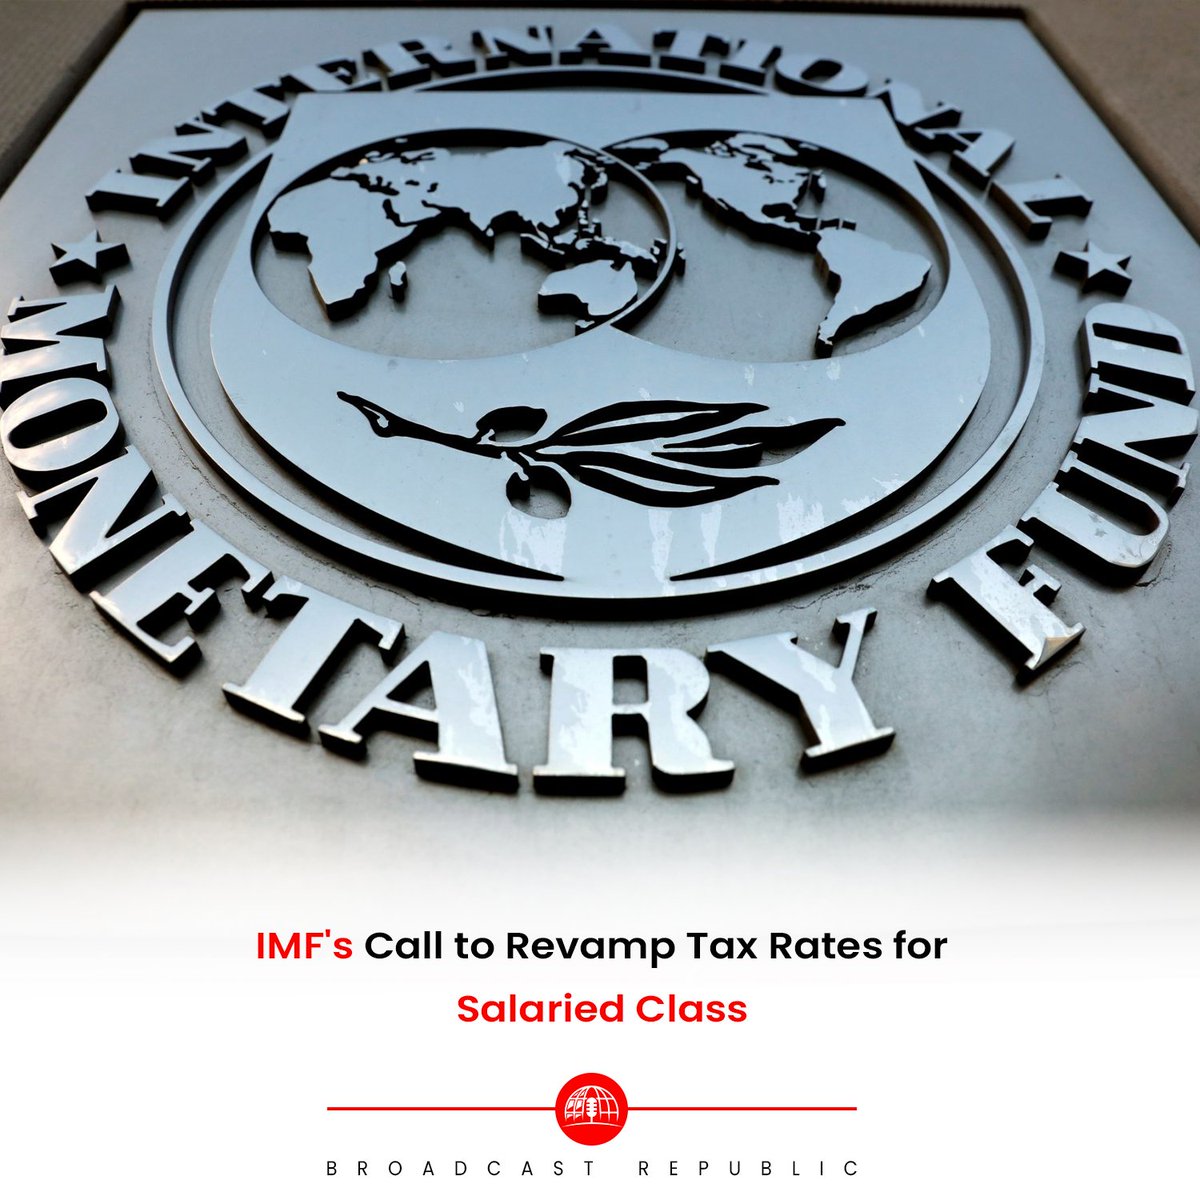 IMF's Call to Revamp Tax Rates for Salaried Class. #BroadcastRepublic #IMF #Tax